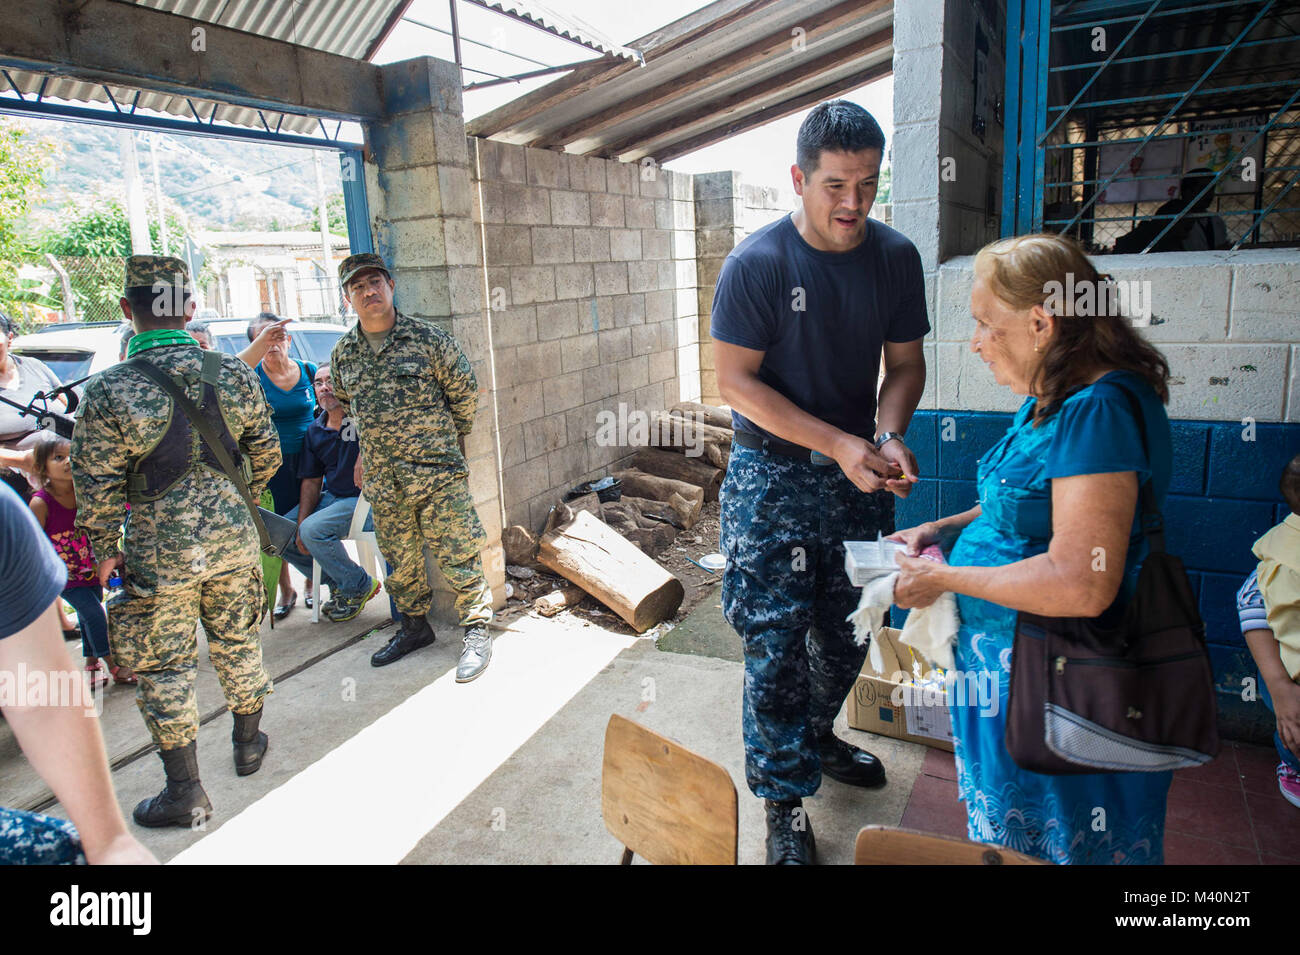 150617-N-PD309-214 SAN JULIAN, El Salvador (June 17, 2015) Ship's Serviceman 2nd Class Gerardo Rangel, a native of Tijuana, Mexico, assigned to Walter Reed National Military Medical Center Bethesda, Md., speaks to a patient at a medical site established at Centro Escolar Doctor Eduardo Enrique Barriento during Continuing Promise 2015. Continuing Promise is a U.S. Southern Command-sponsored and U.S. Naval Forces Southern Command/U.S. 4th Fleet-conducted deployment to conduct civil-military operations including humanitarian-civil assistance, subject matter expert exchanges, medical, dental, vete Stock Photo